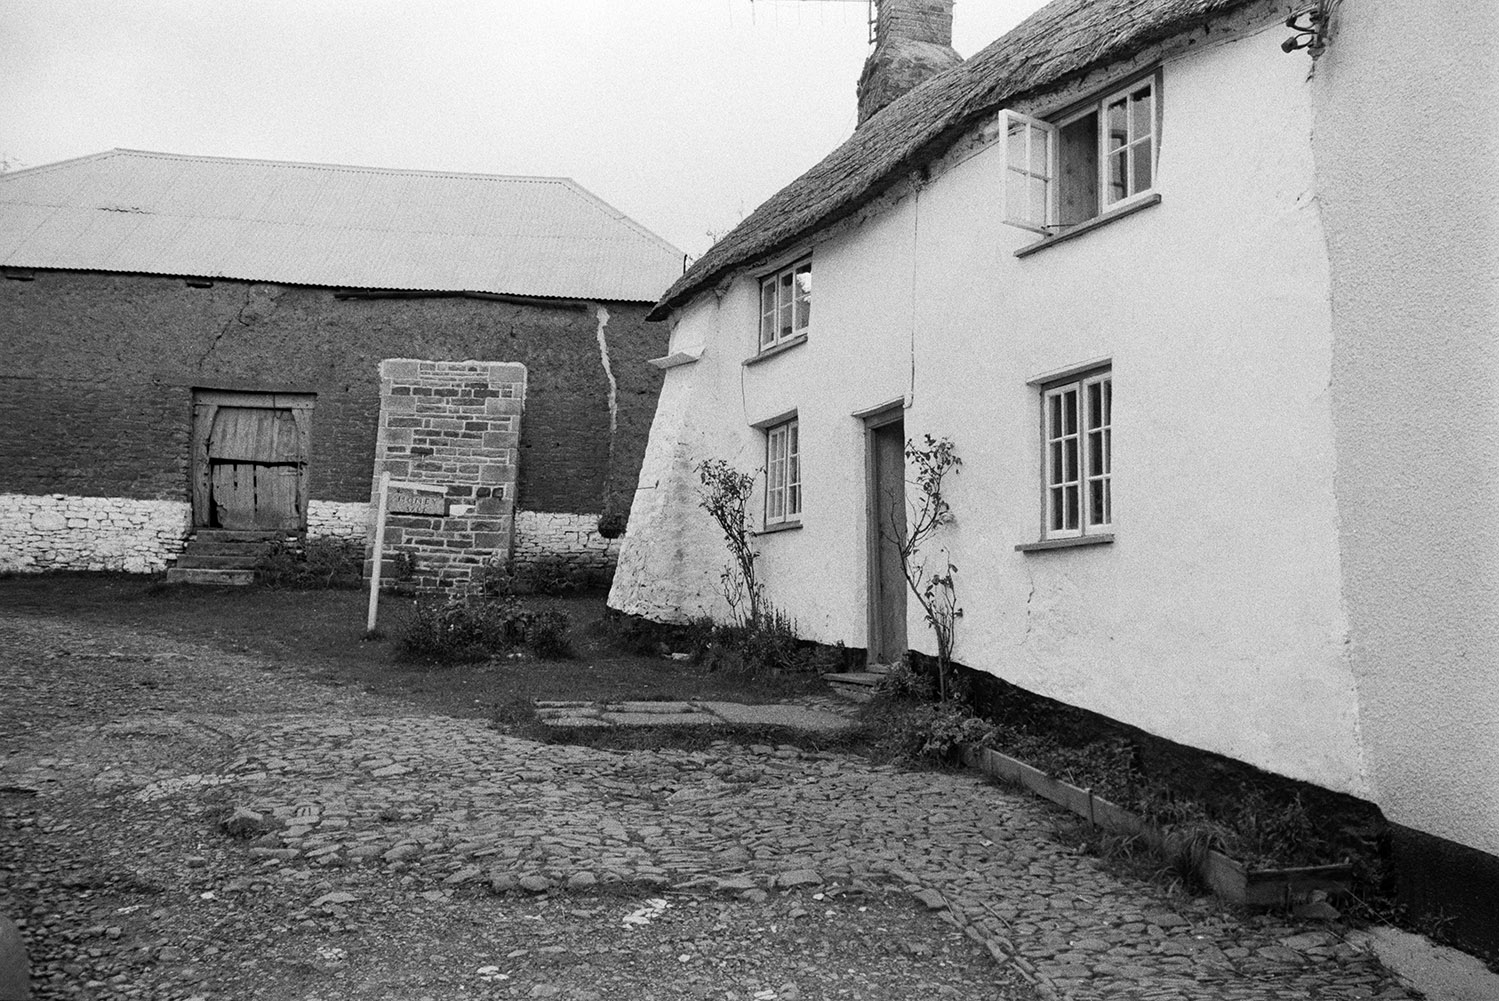 A thatched cottage next to a cob and stone barn with a corrugated iron roof, in Atherington. A sign outside the cottage reads 'Honey Sale' and the ground is cobbled.